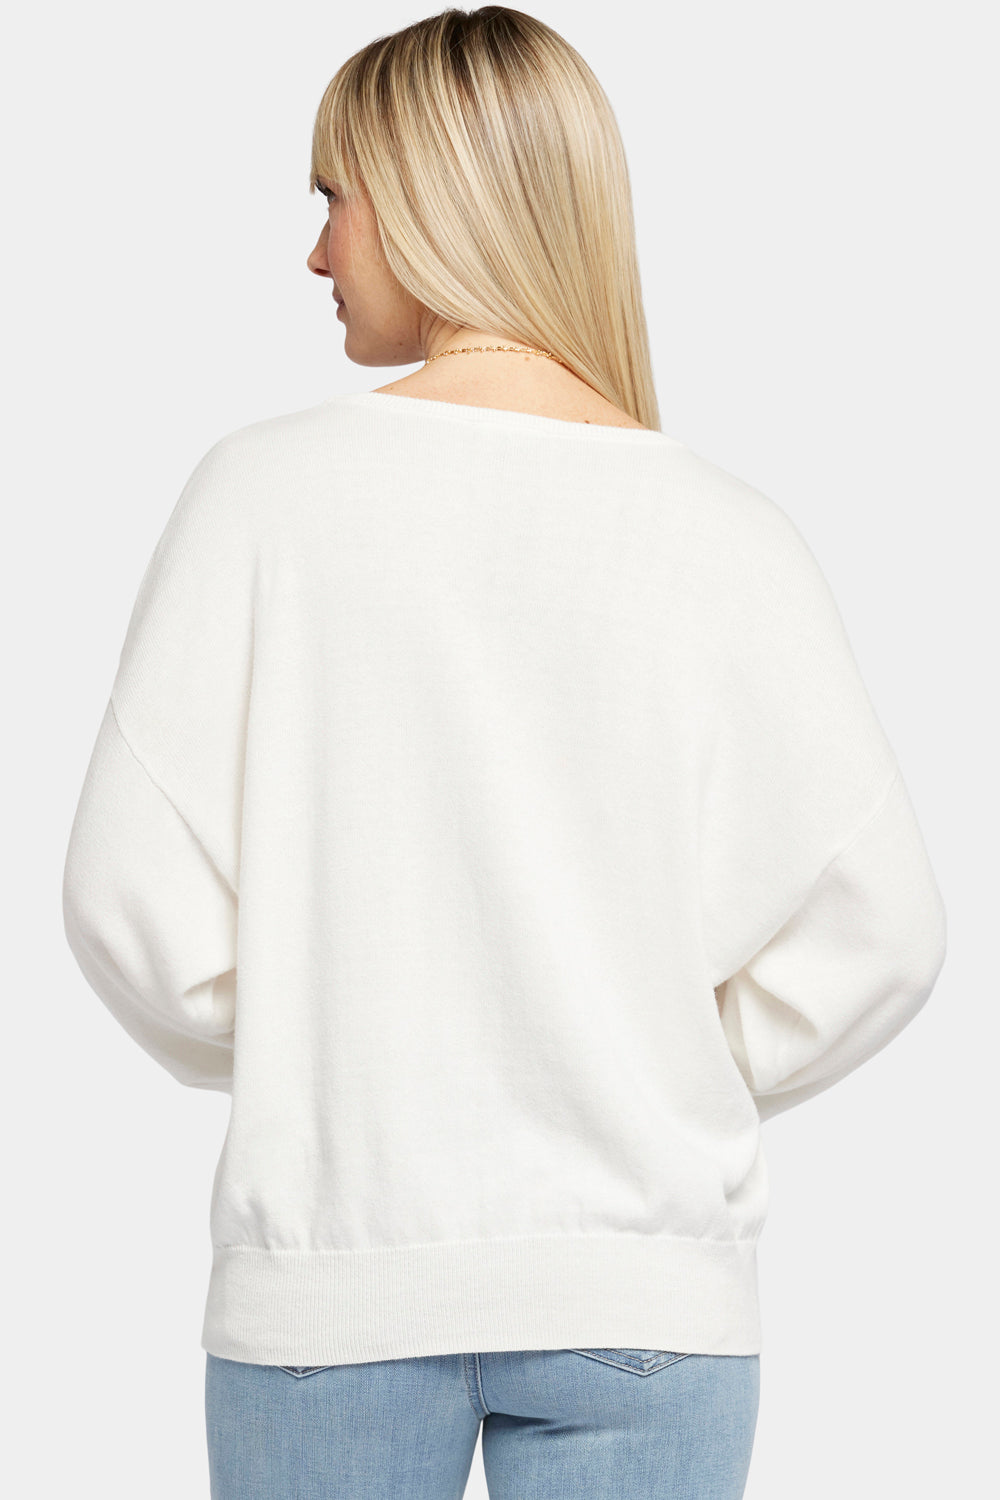 NYDJ Dolman Sleeved Boatneck Sweater With Cashmere - Ivory